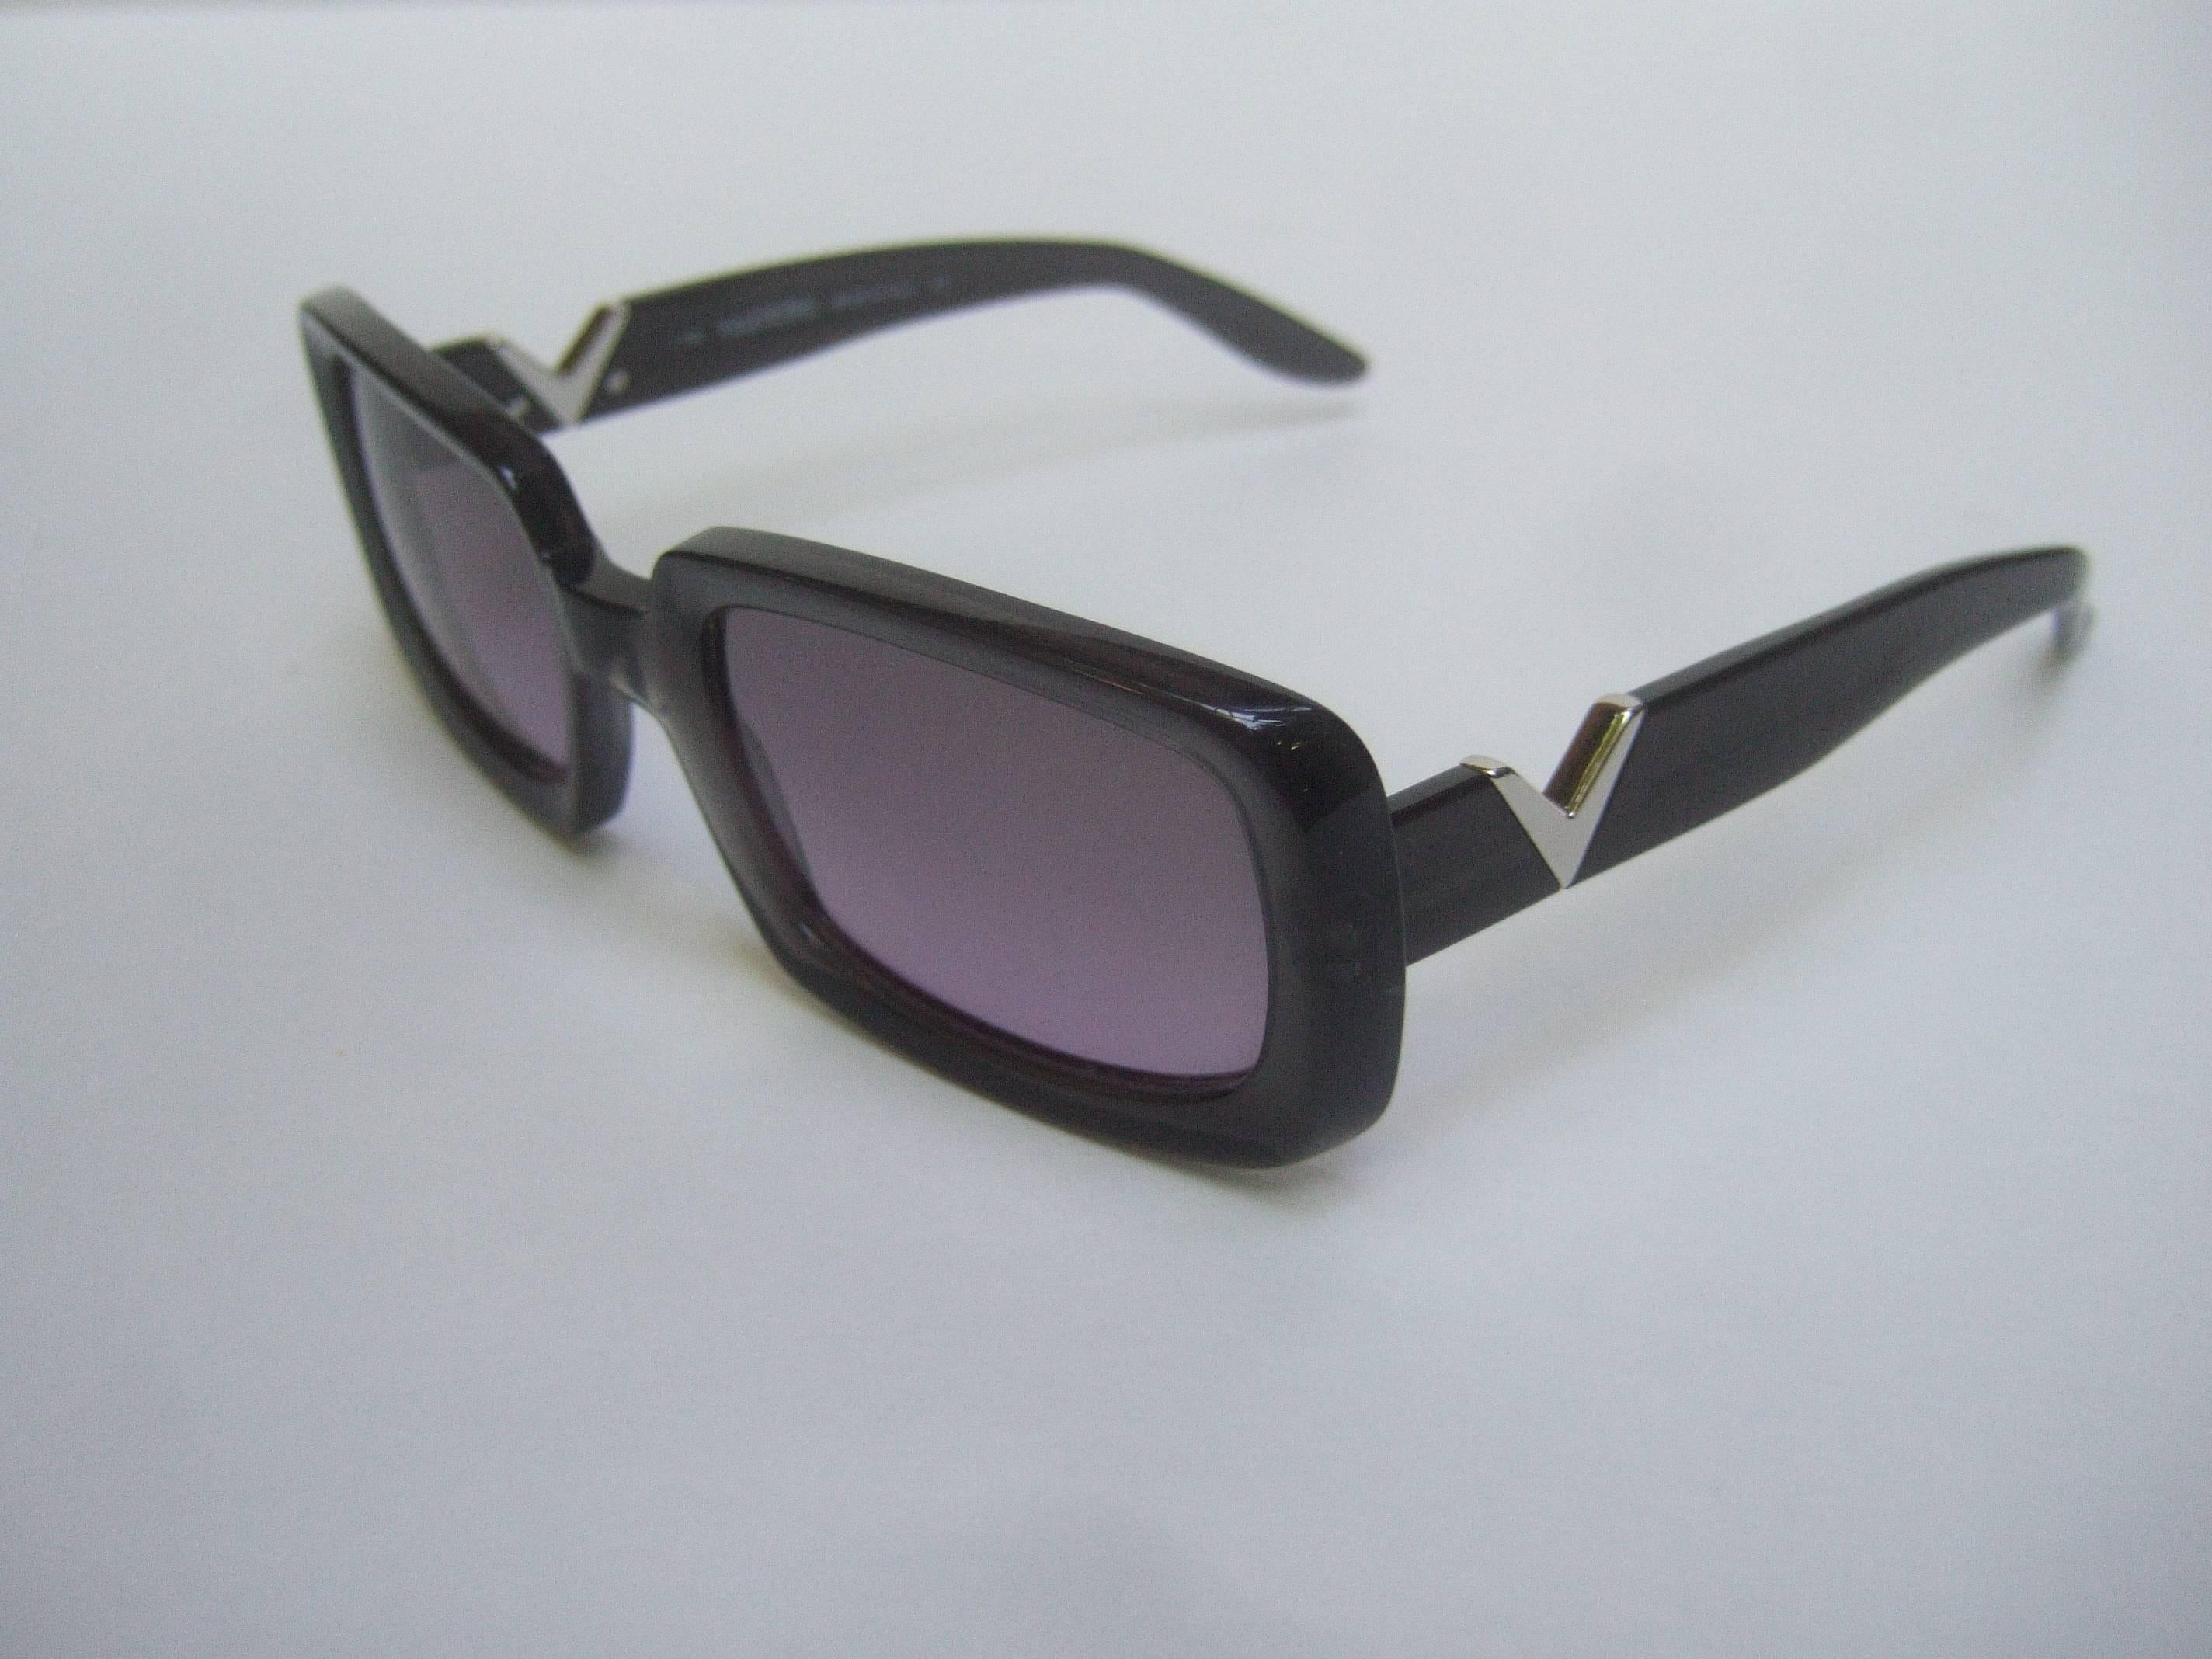 Valentino Sleek ebony lavender lens sunglasses
The stylish designer sunglasses are constructed 
with shiny black plastic frames  

Designed with lavender purple plastic lenses 
The sides are adorned with sleek chrome metal 
V initials

The